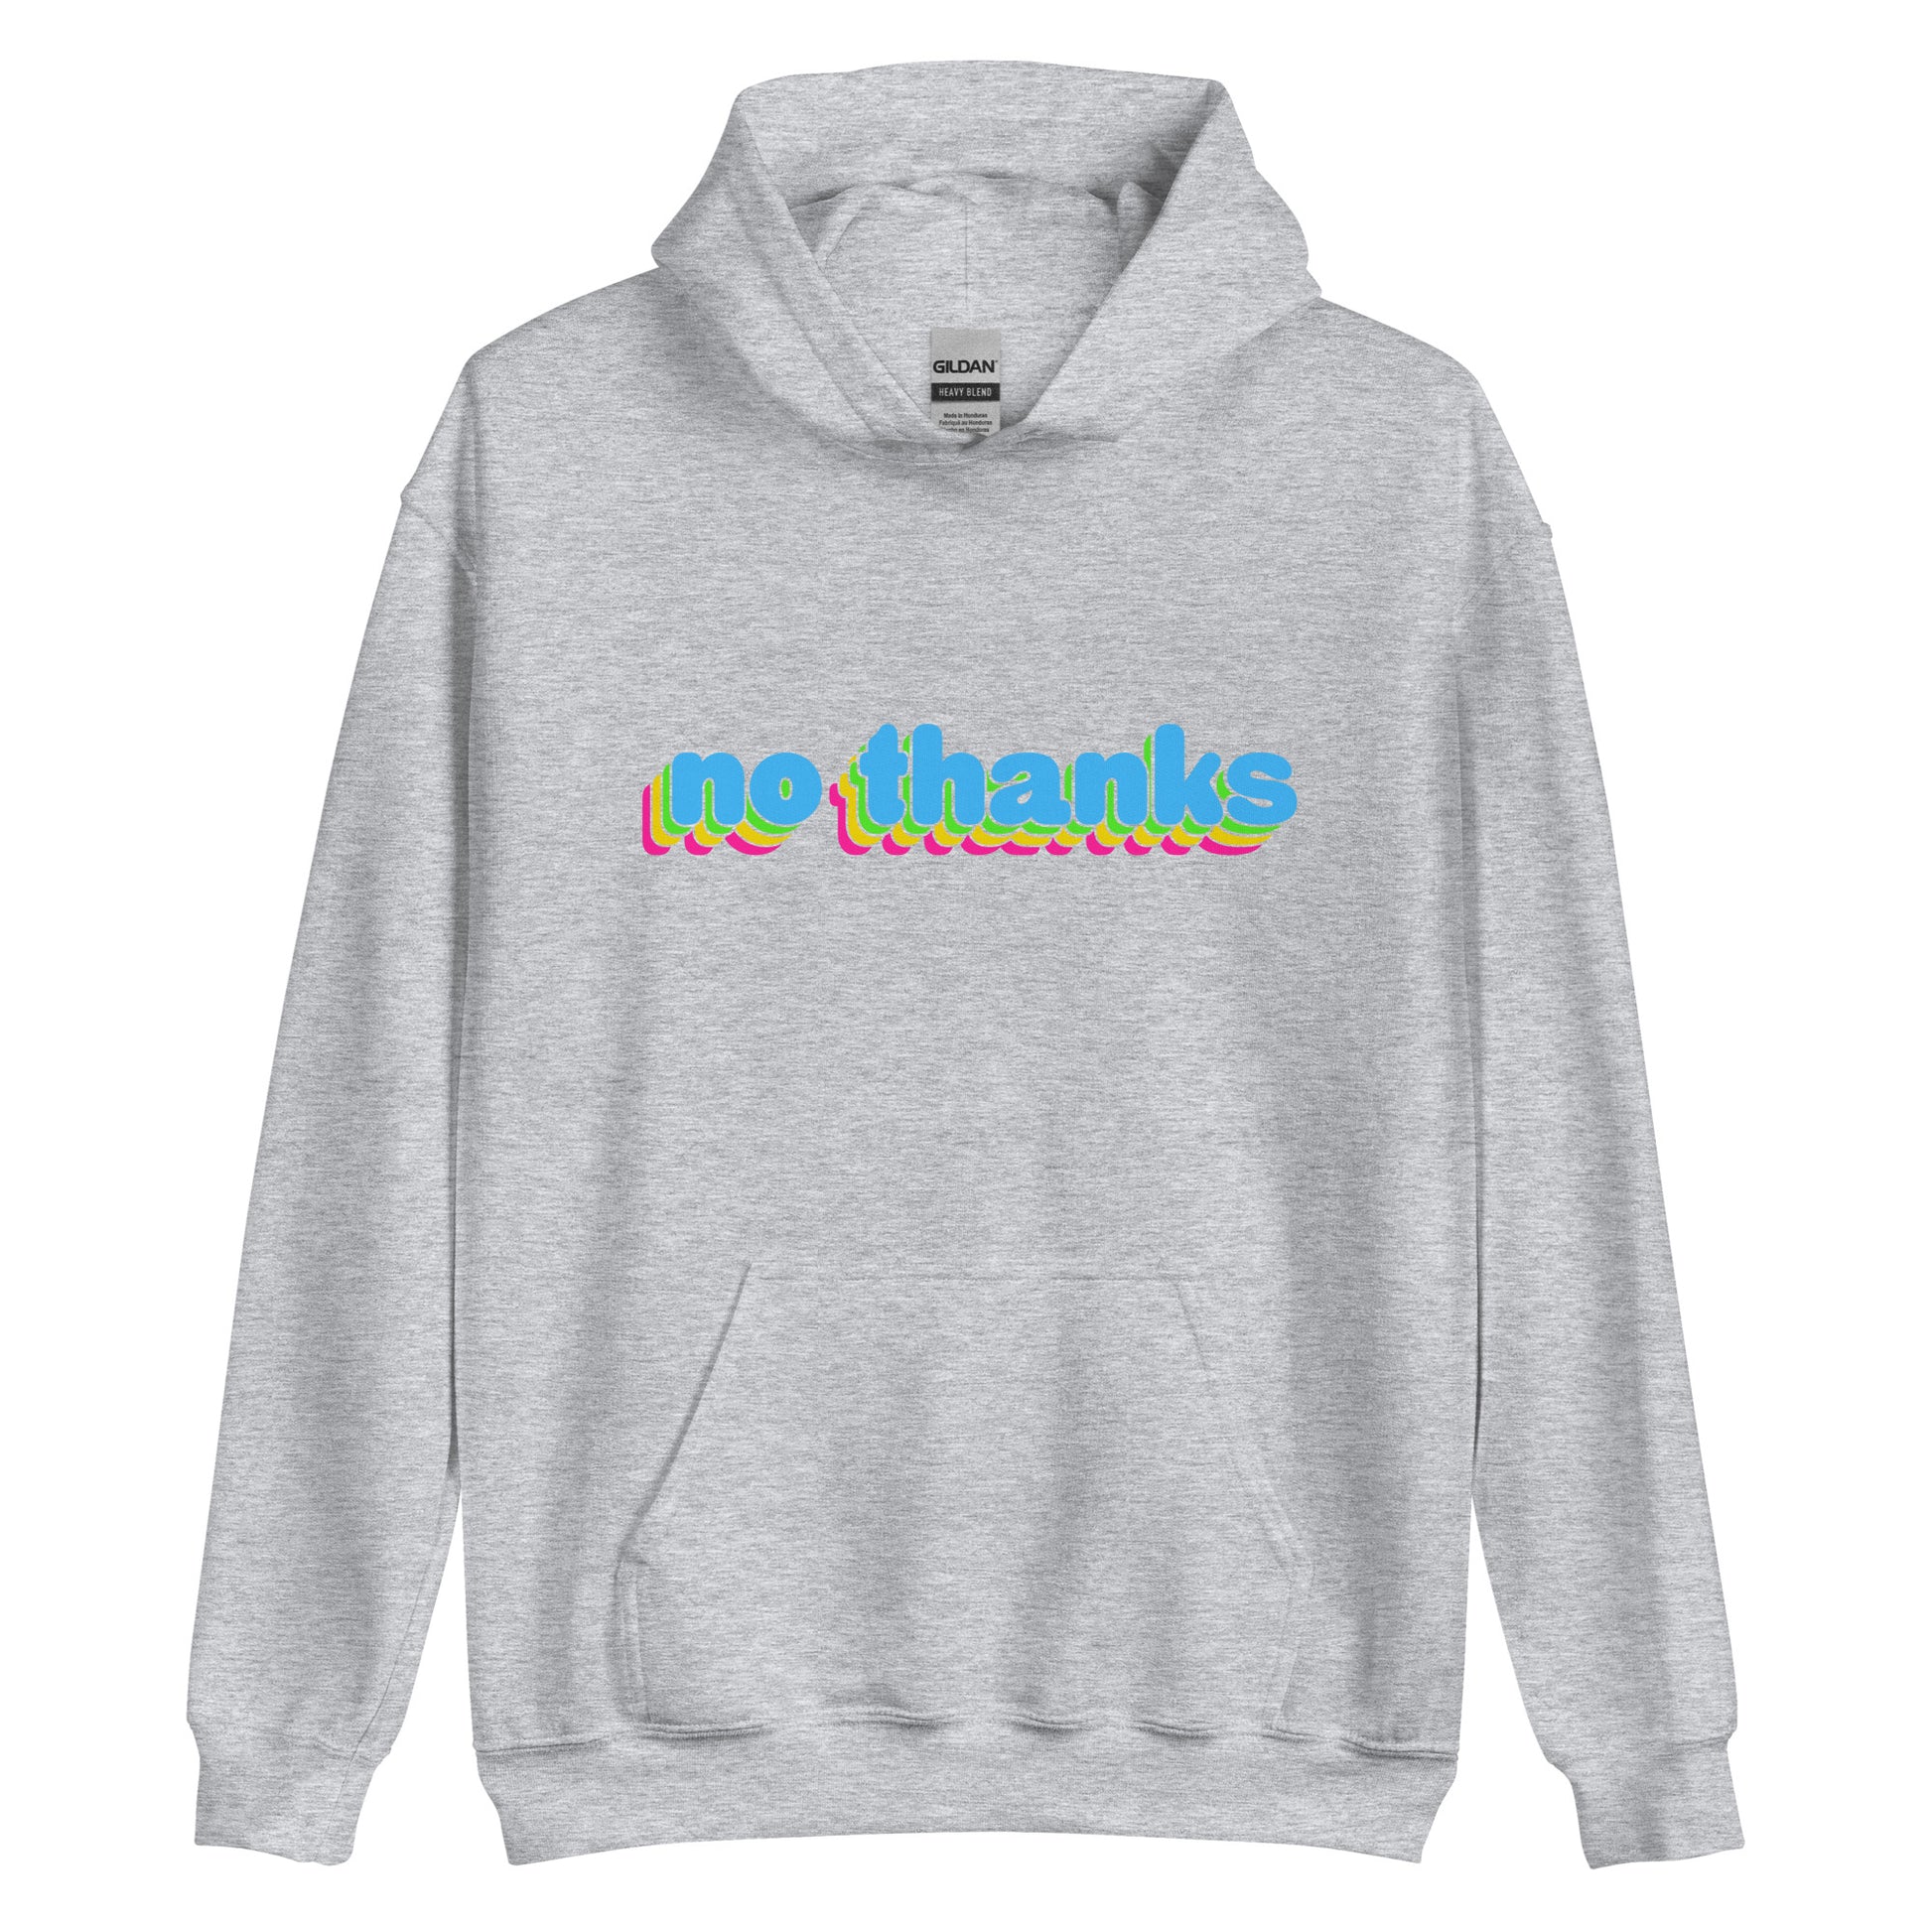 A grey hooded sweatshirt featuring large, colorful bubble text that reads "no thanks".